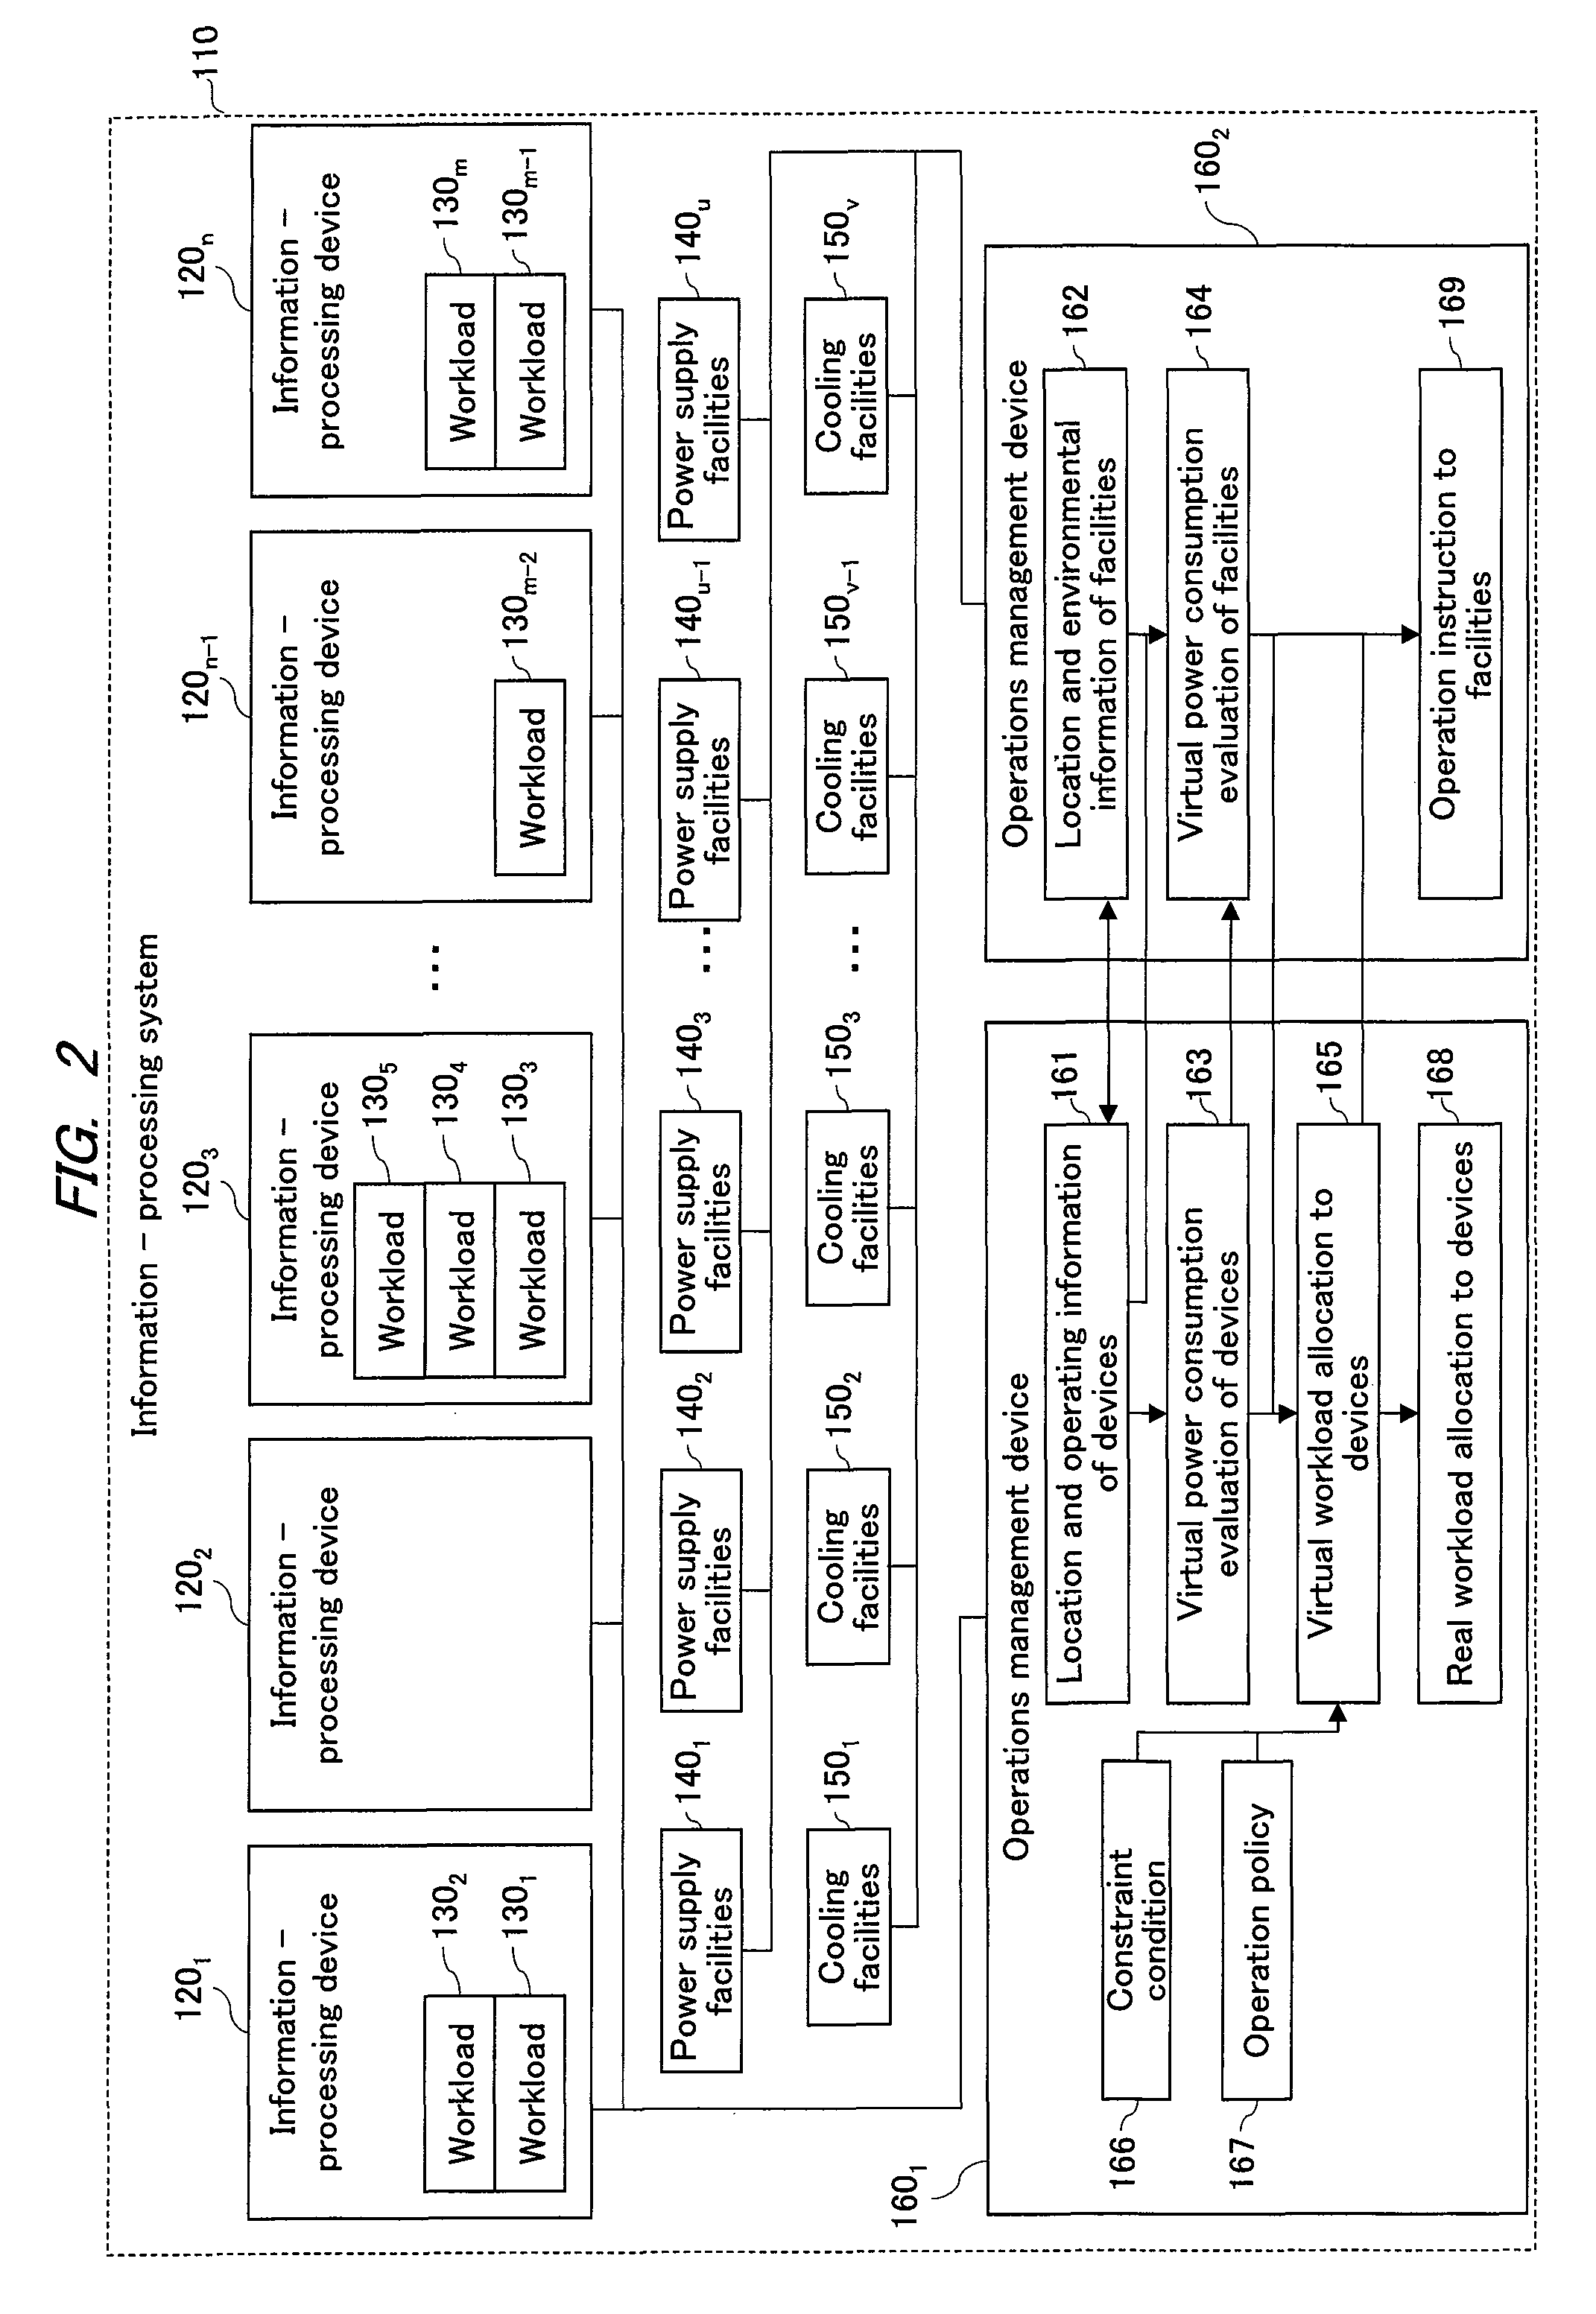 Operations management methods and devices thereof in information-processing systems